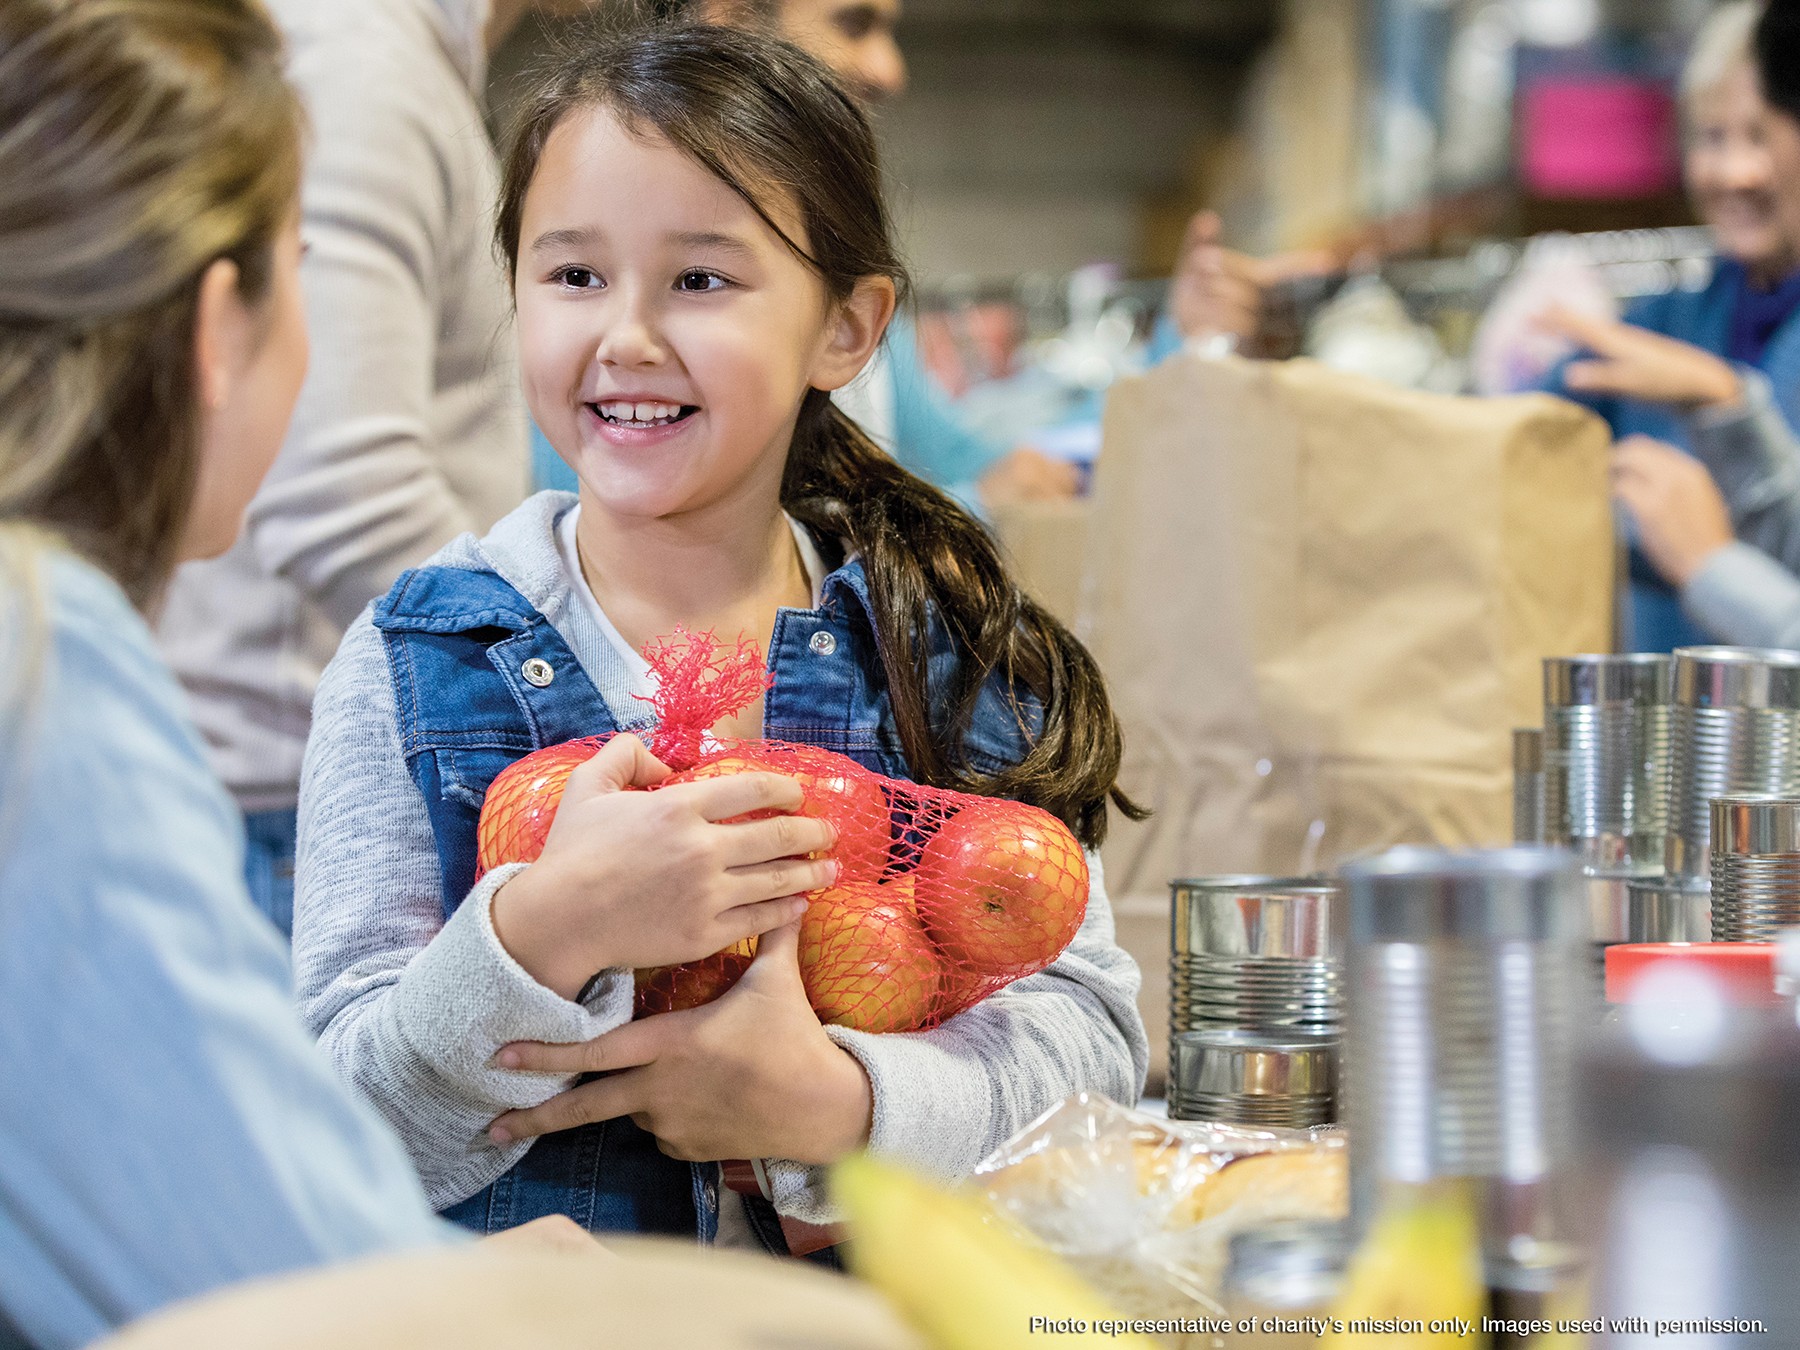 Cute elementary girl smiles as she donates a bag of apples during a community food drive.